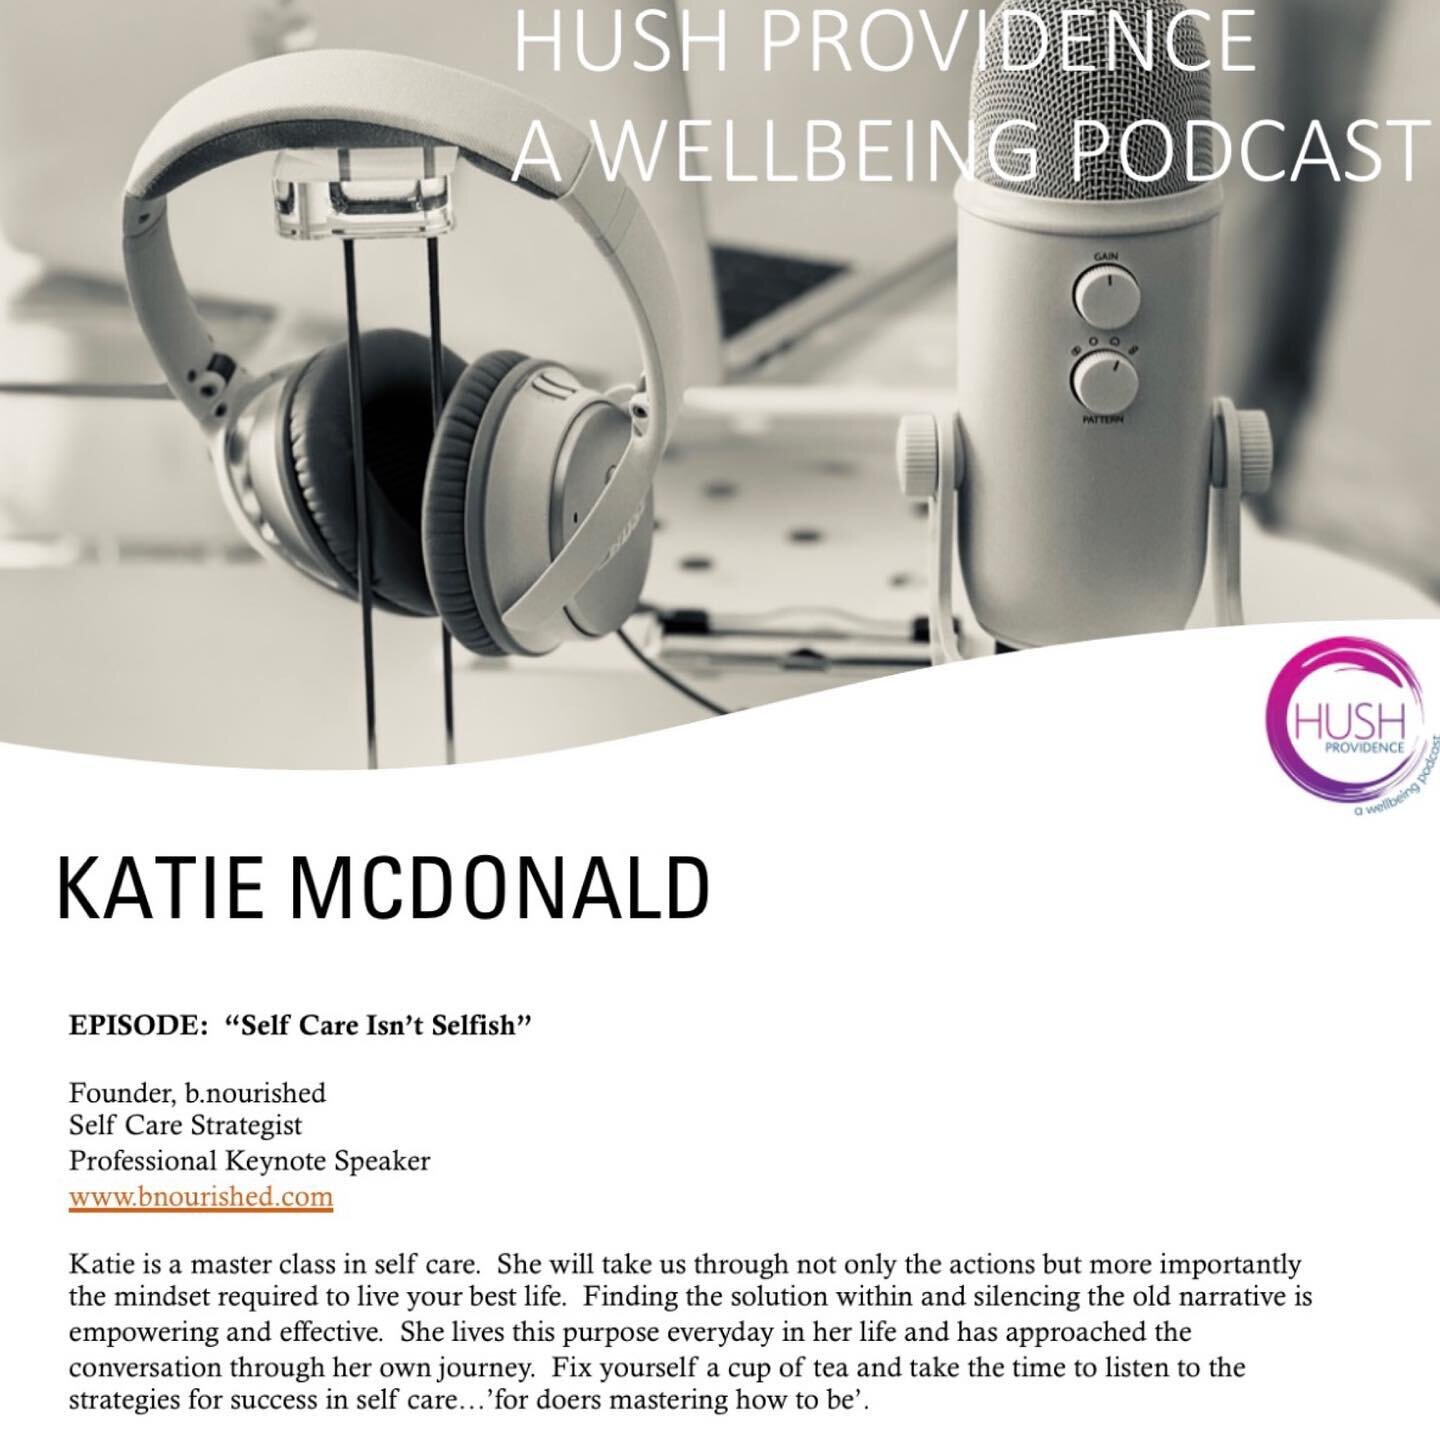 Tune in tomorrow, May 17th, for the inaugural episode of HUSH Providence, a wellbeing podcast, on all your favorite platforms.  More details tomorrow.